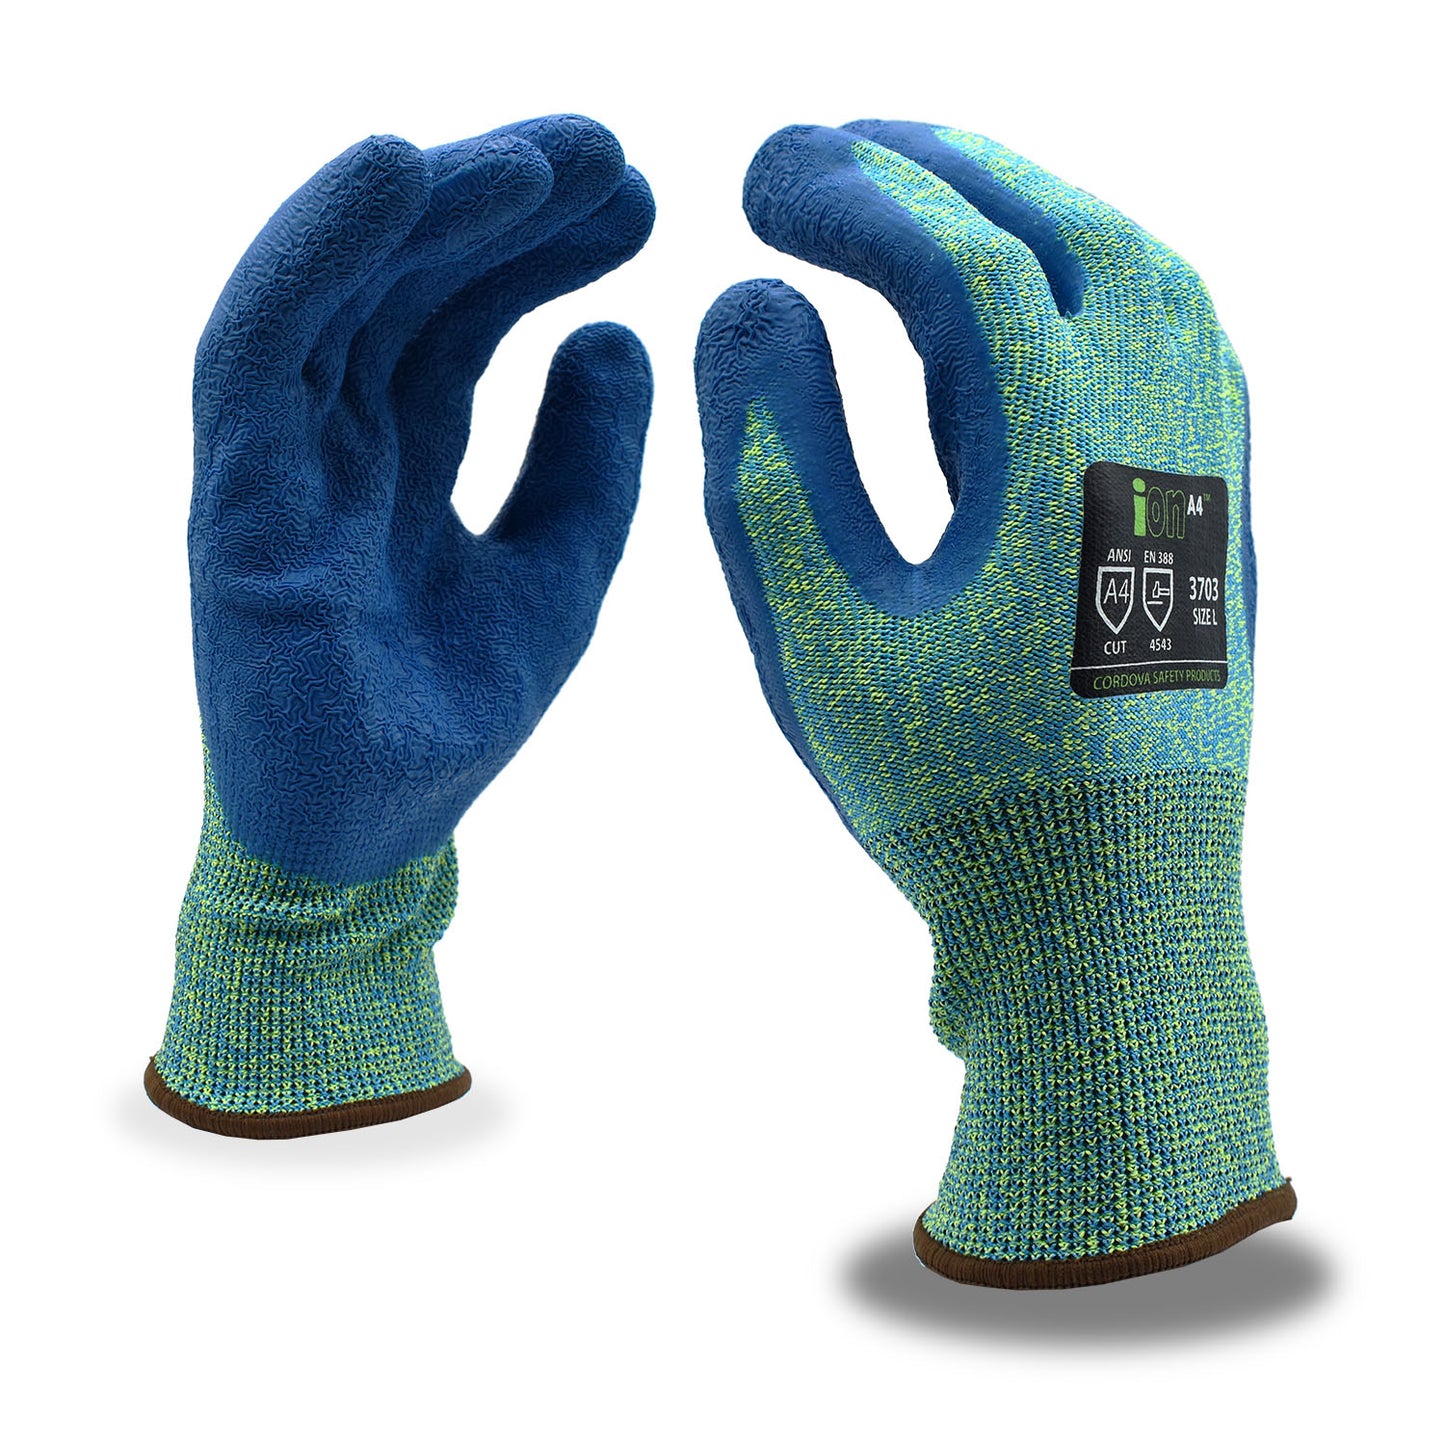 Cut-Resistant Gloves, ANSI Cut Level A4, Crinkle Latex